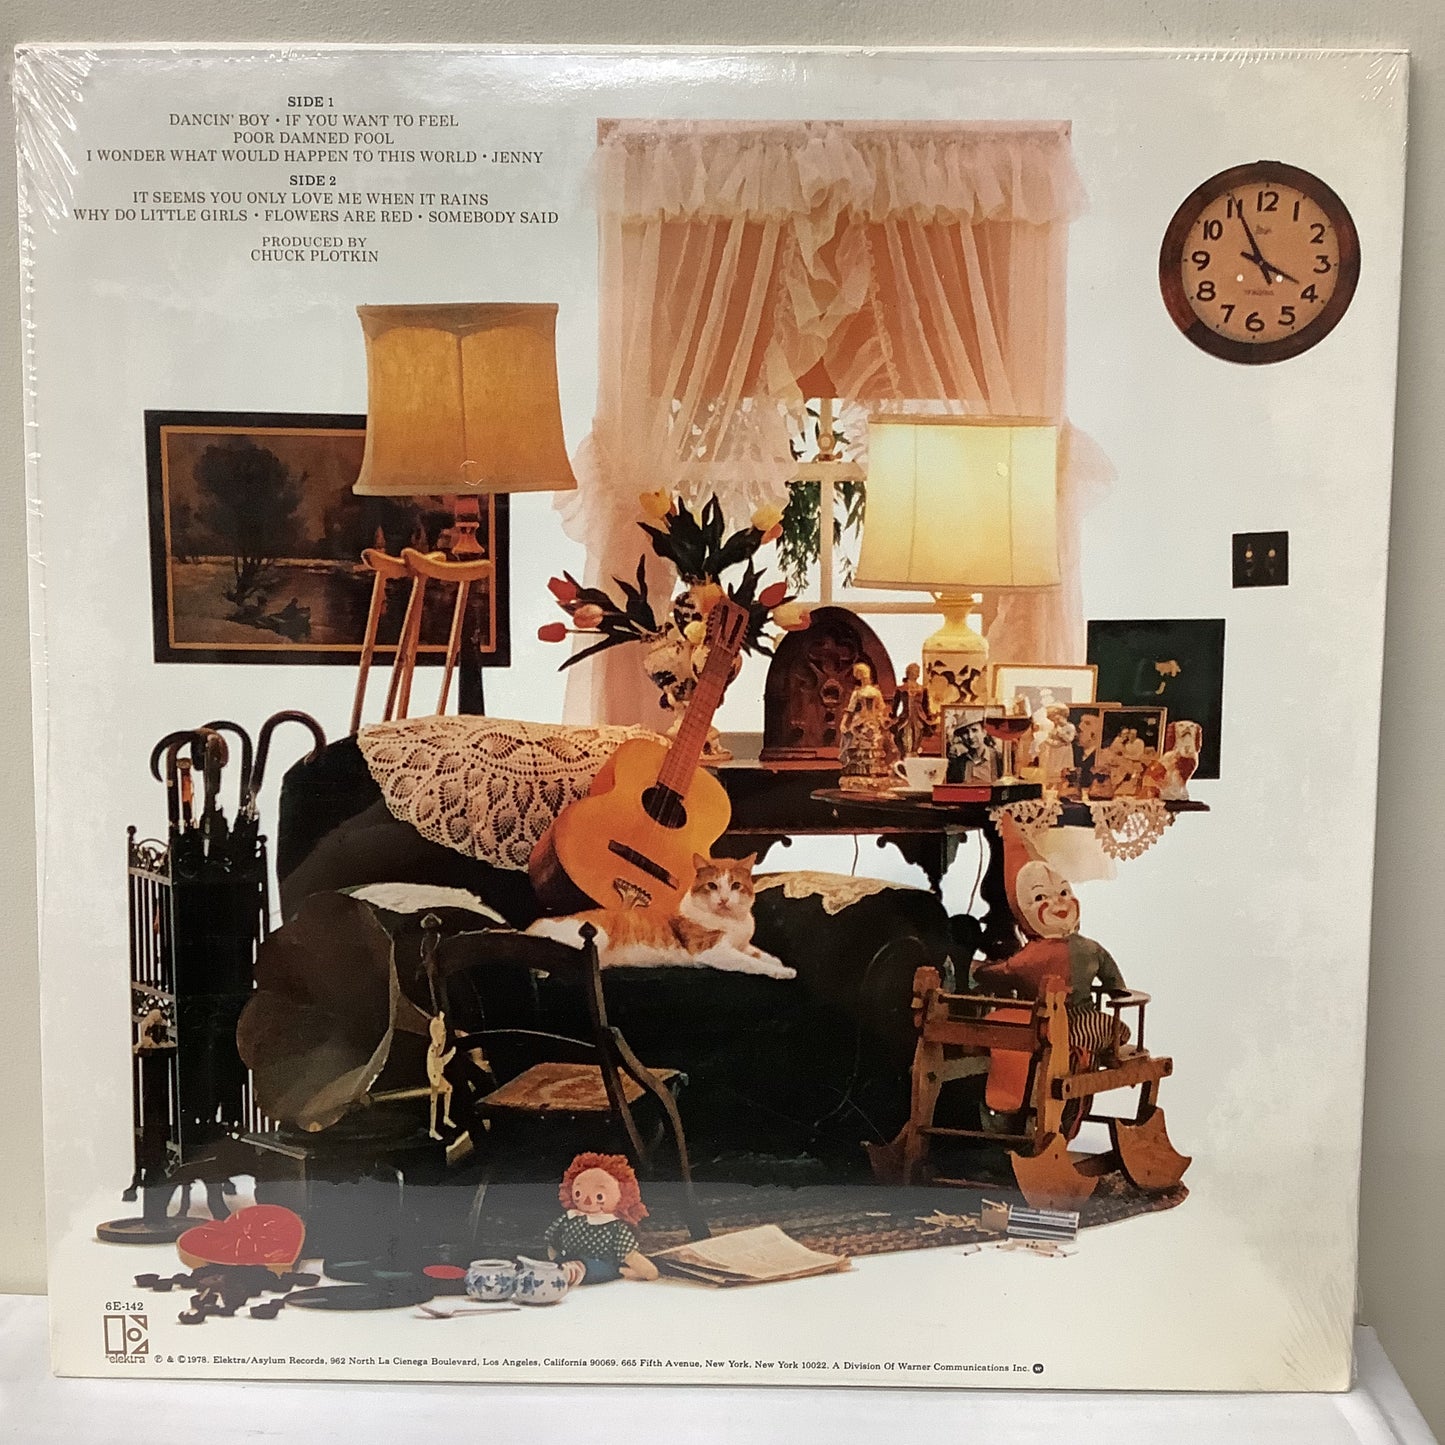 Harry Chapin – Living Room Suite – LP